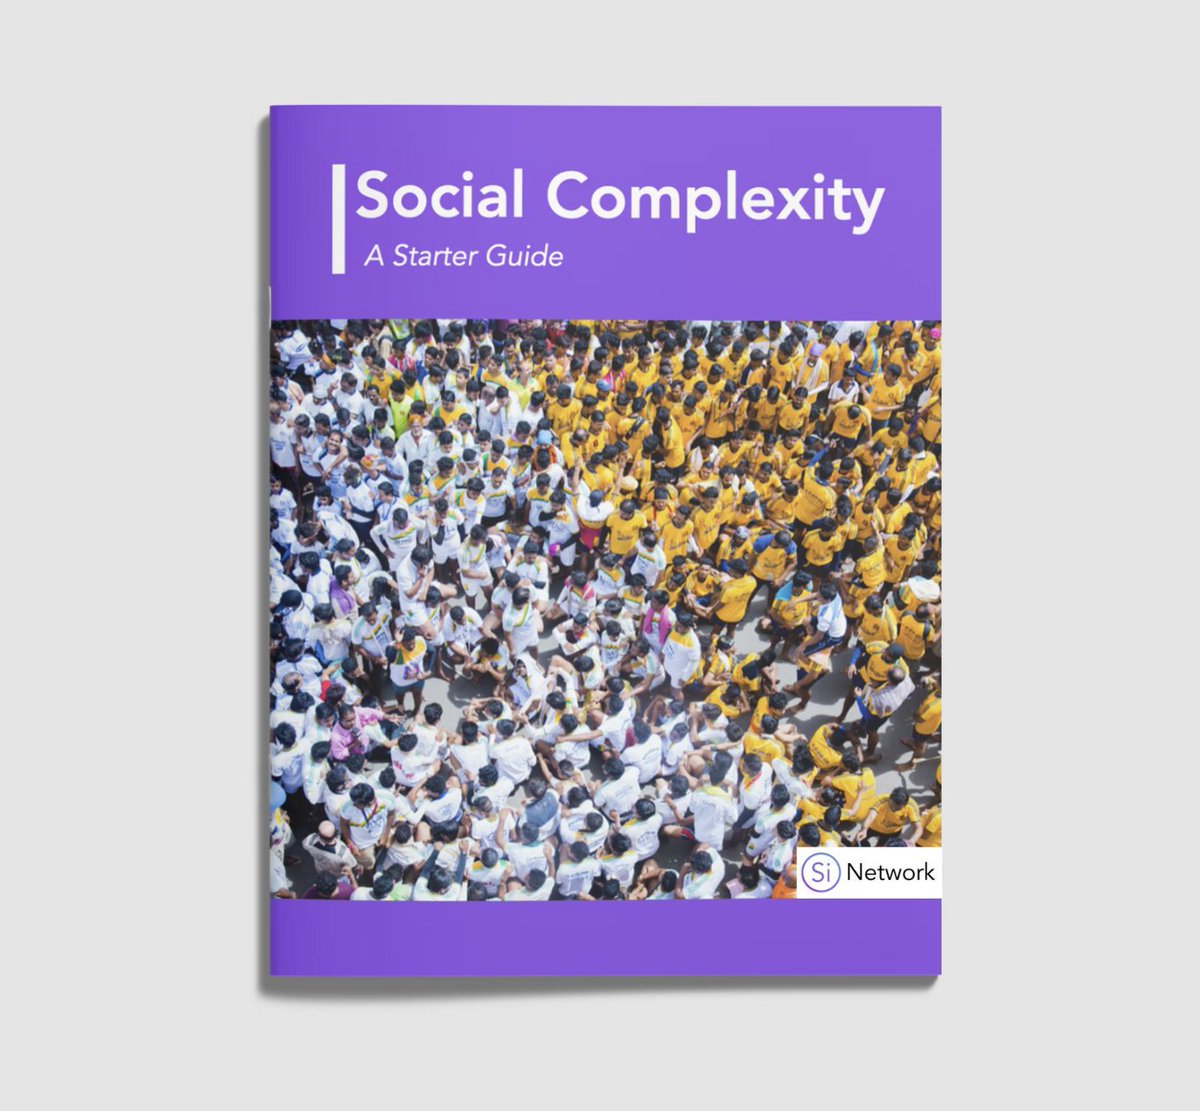 Have you found this course and booklet at Si that will help you understand social systems and complexity? Booklet: t.ly/krqPz Video course: t.ly/tCQRZ